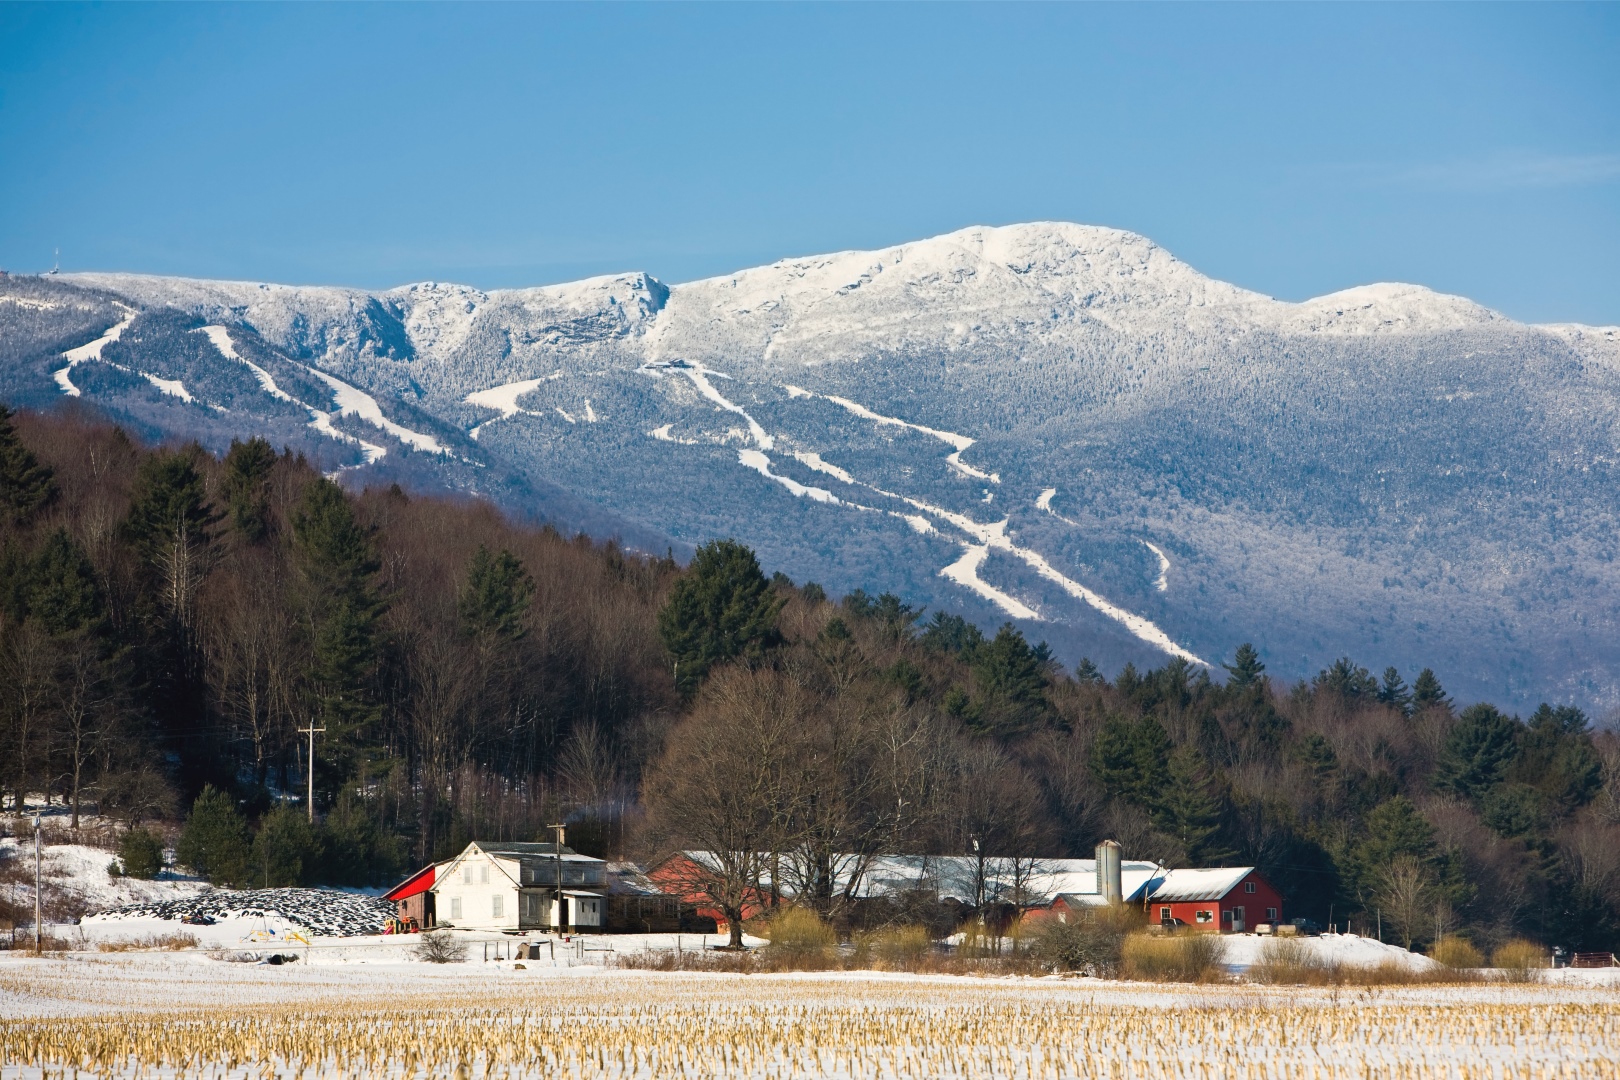 Snow-capped mountains above a farm in Stowe, VT